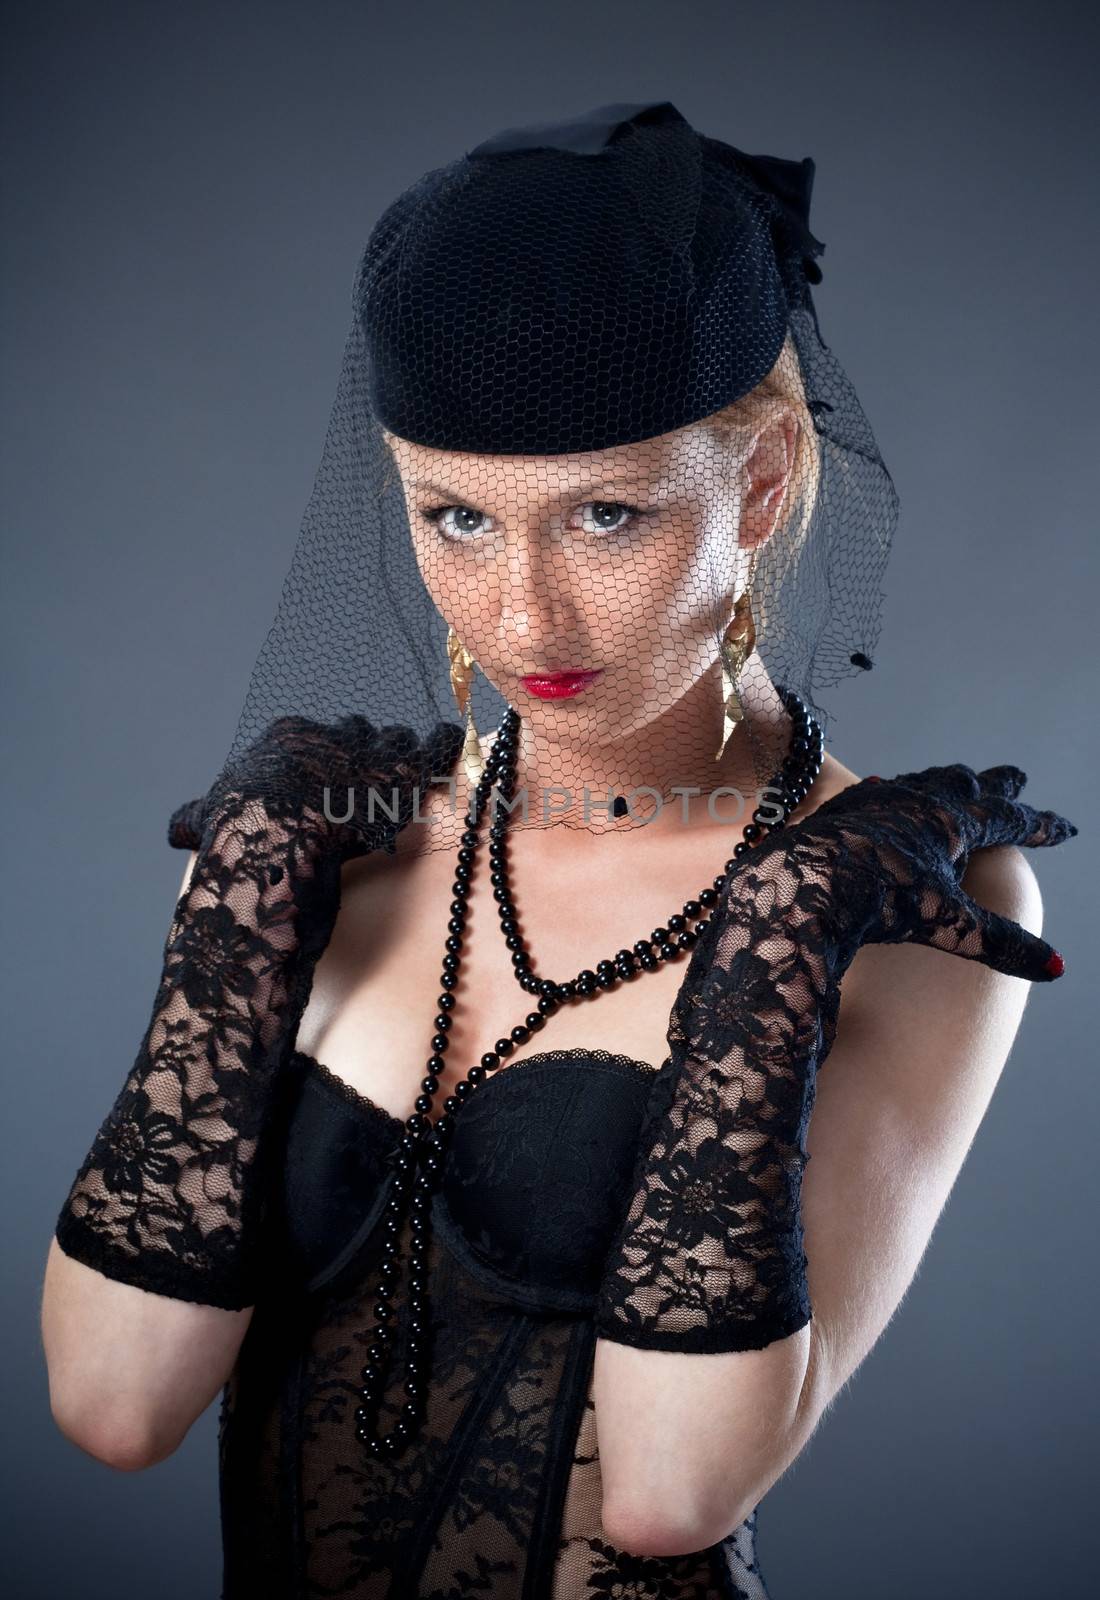 woman in hat with veil and corset
woman in hat with veil and cor by courtyardpix